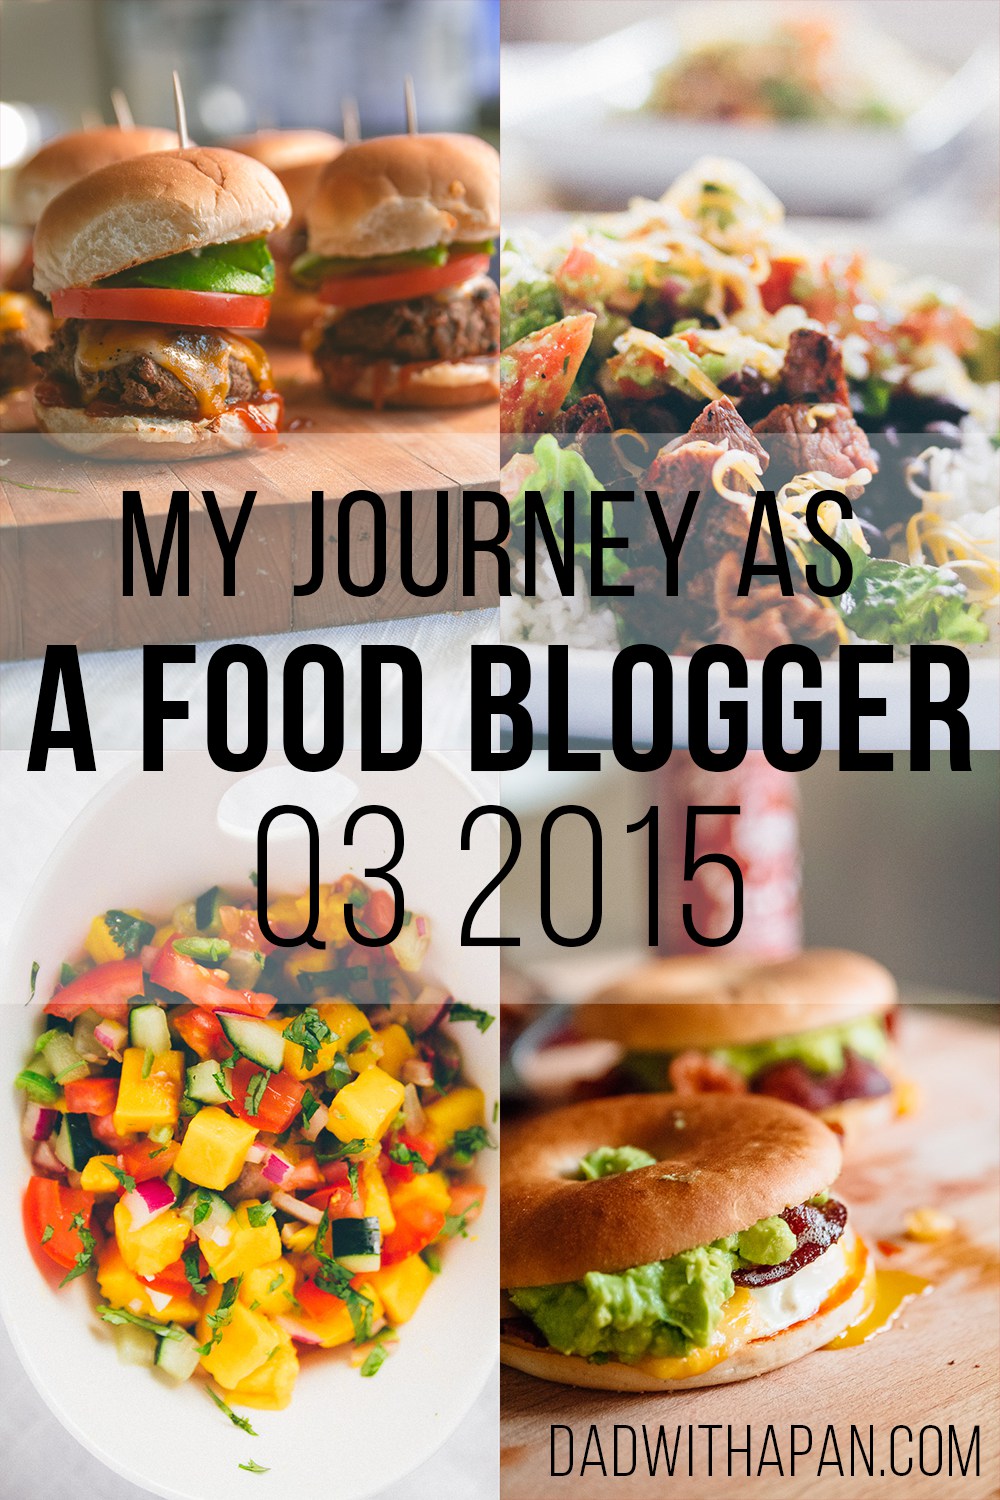 My Journey As A Food Blogger Q3 2015 featured